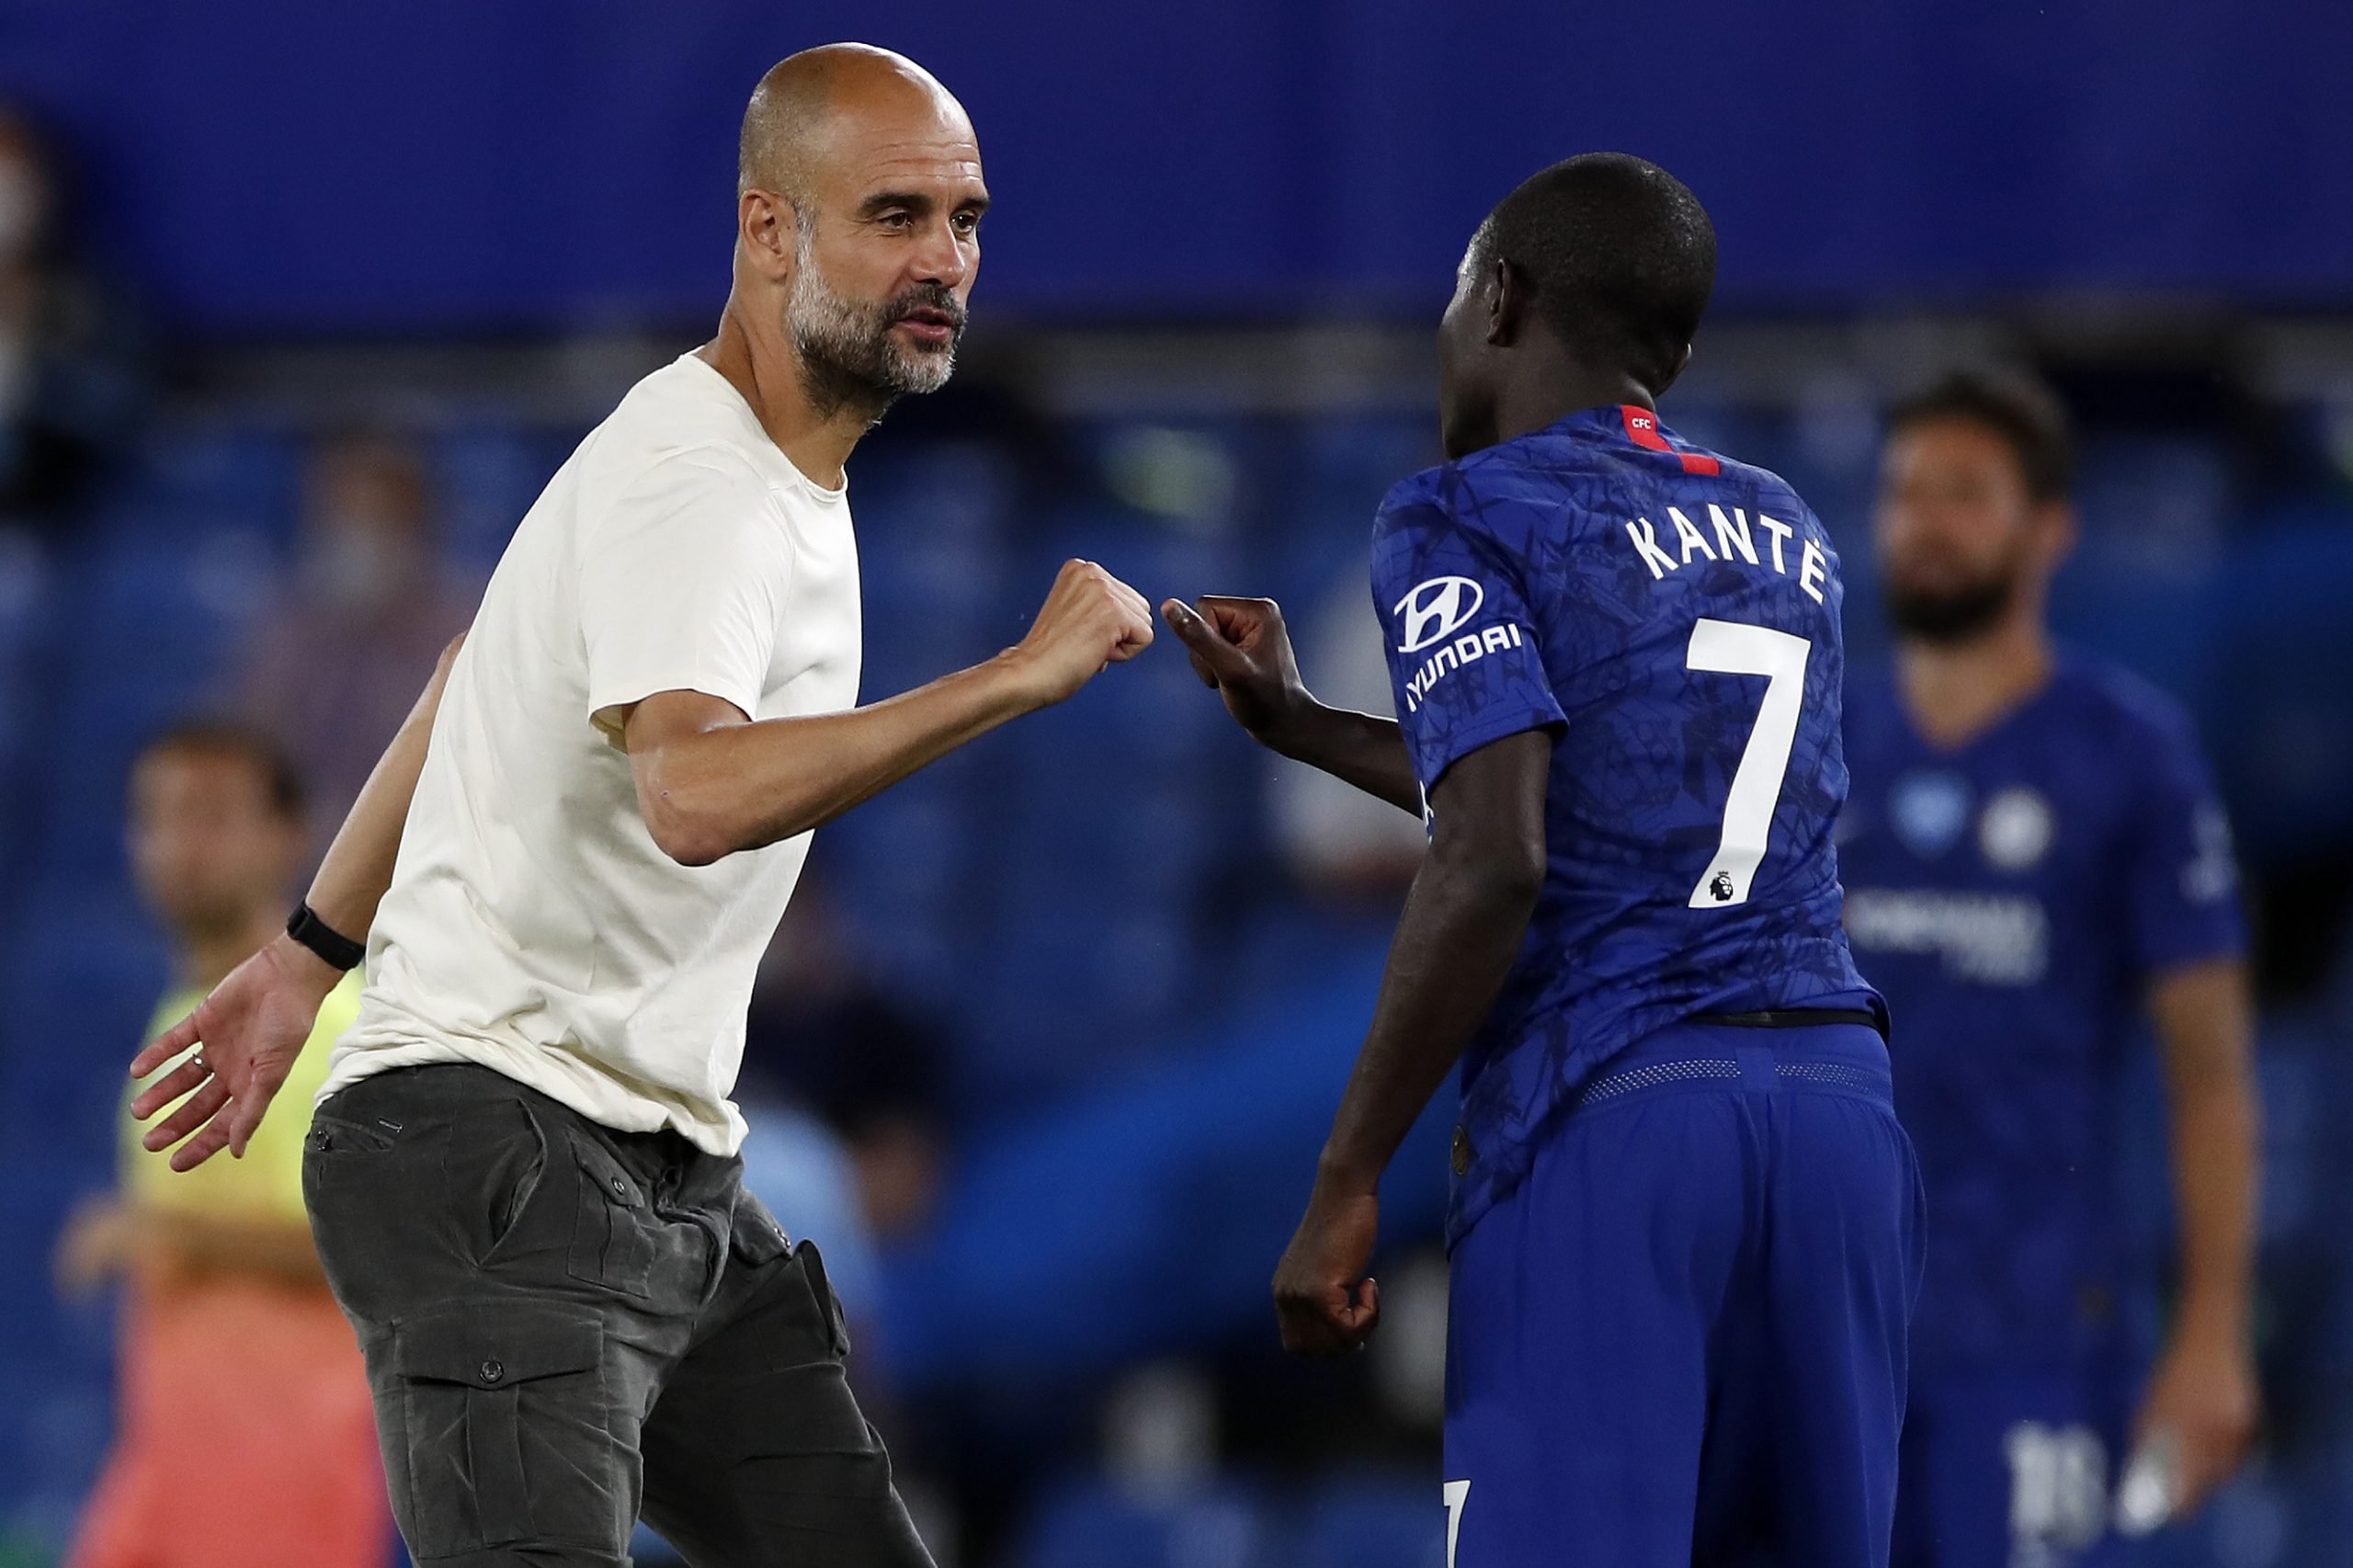 Chelsea Vs Manchester City Tactical Preview - Kante and Guardiola